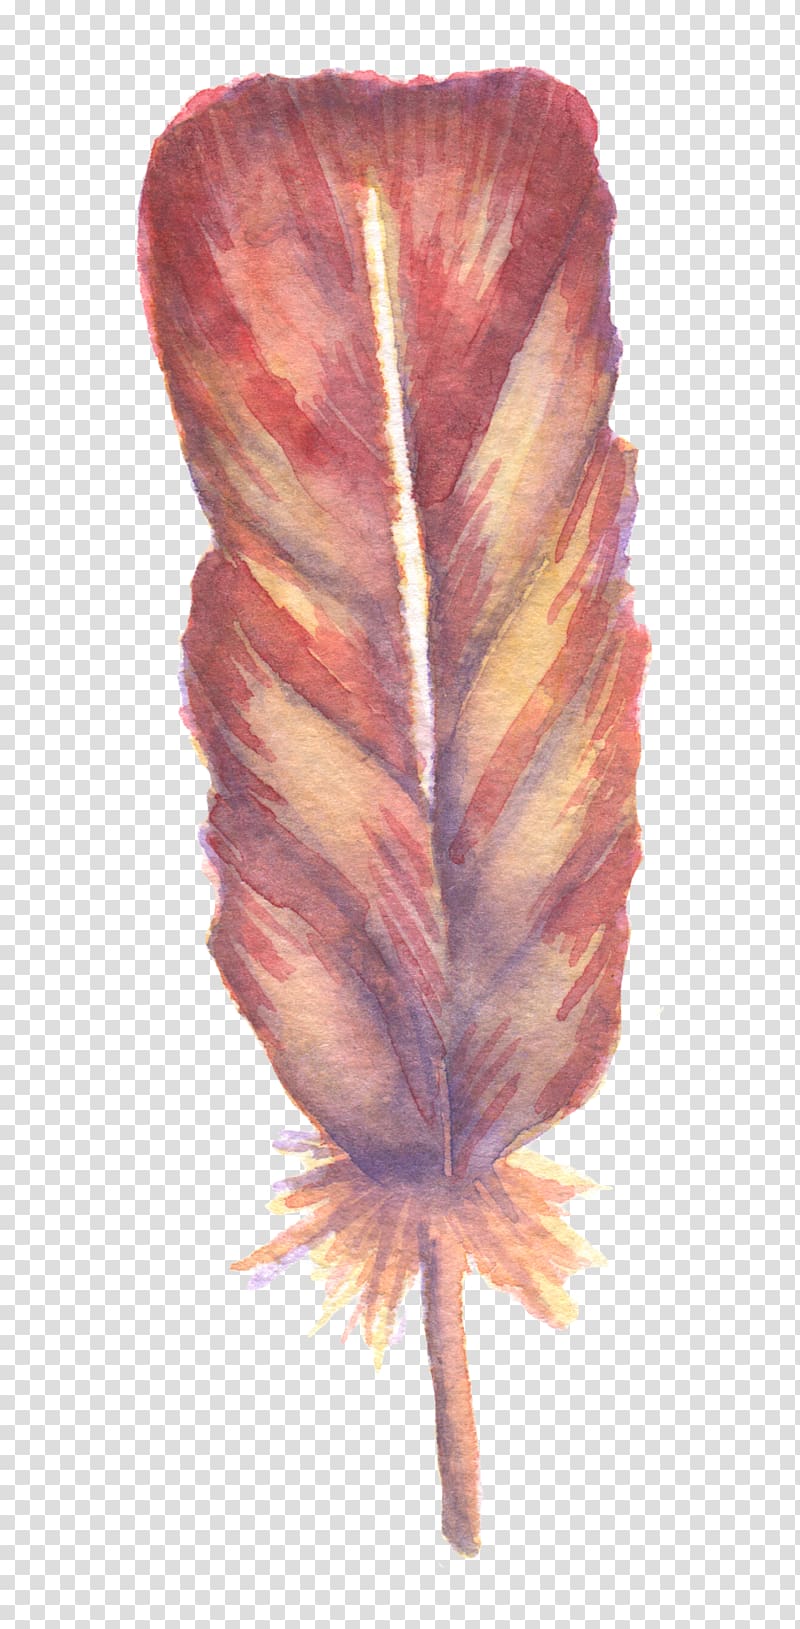 Watercolor: Flowers Watercolor painting Feather, Super beautiful fresh Sen Department watercolor feather transparent background PNG clipart